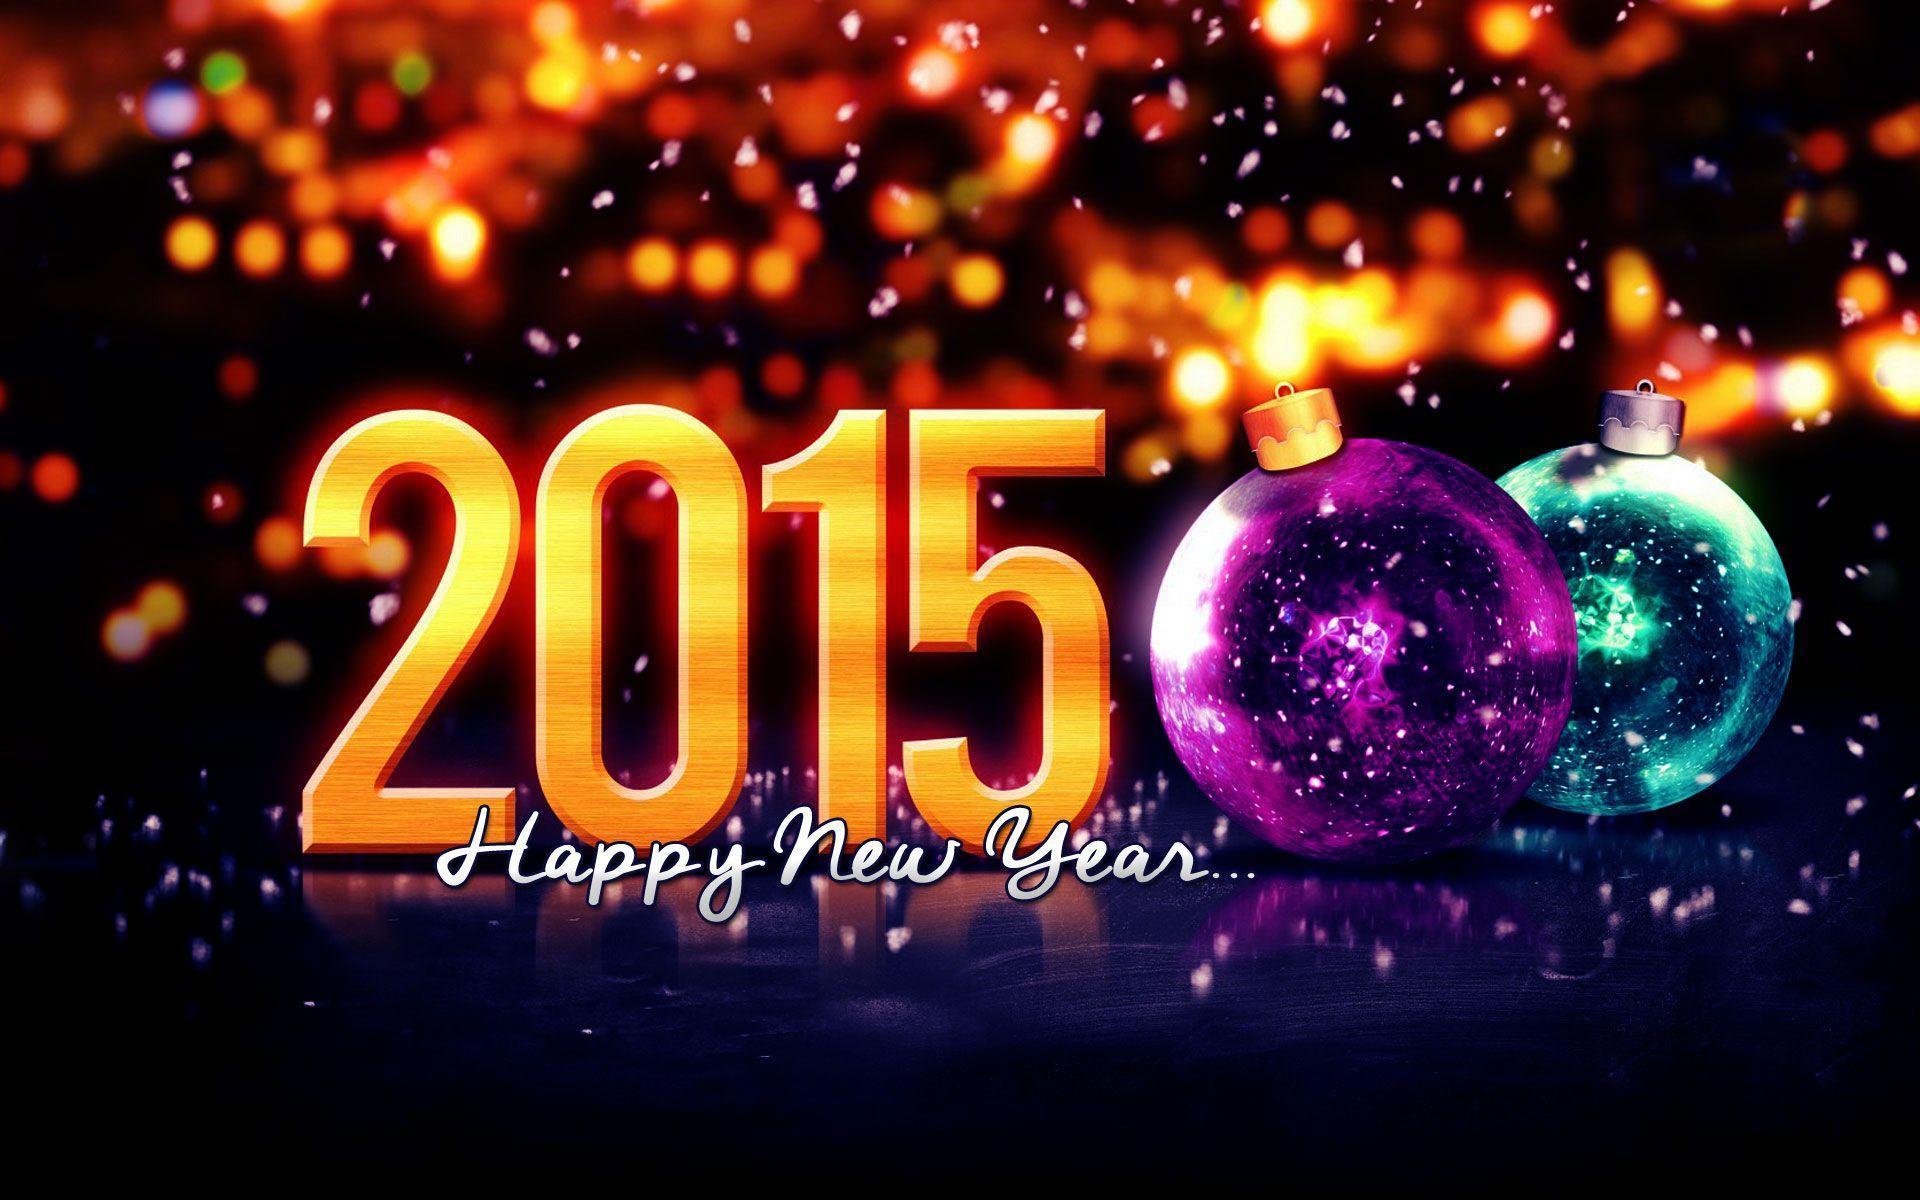 Happy New Year 2015 HD Wallpaper. Best walpapers picture